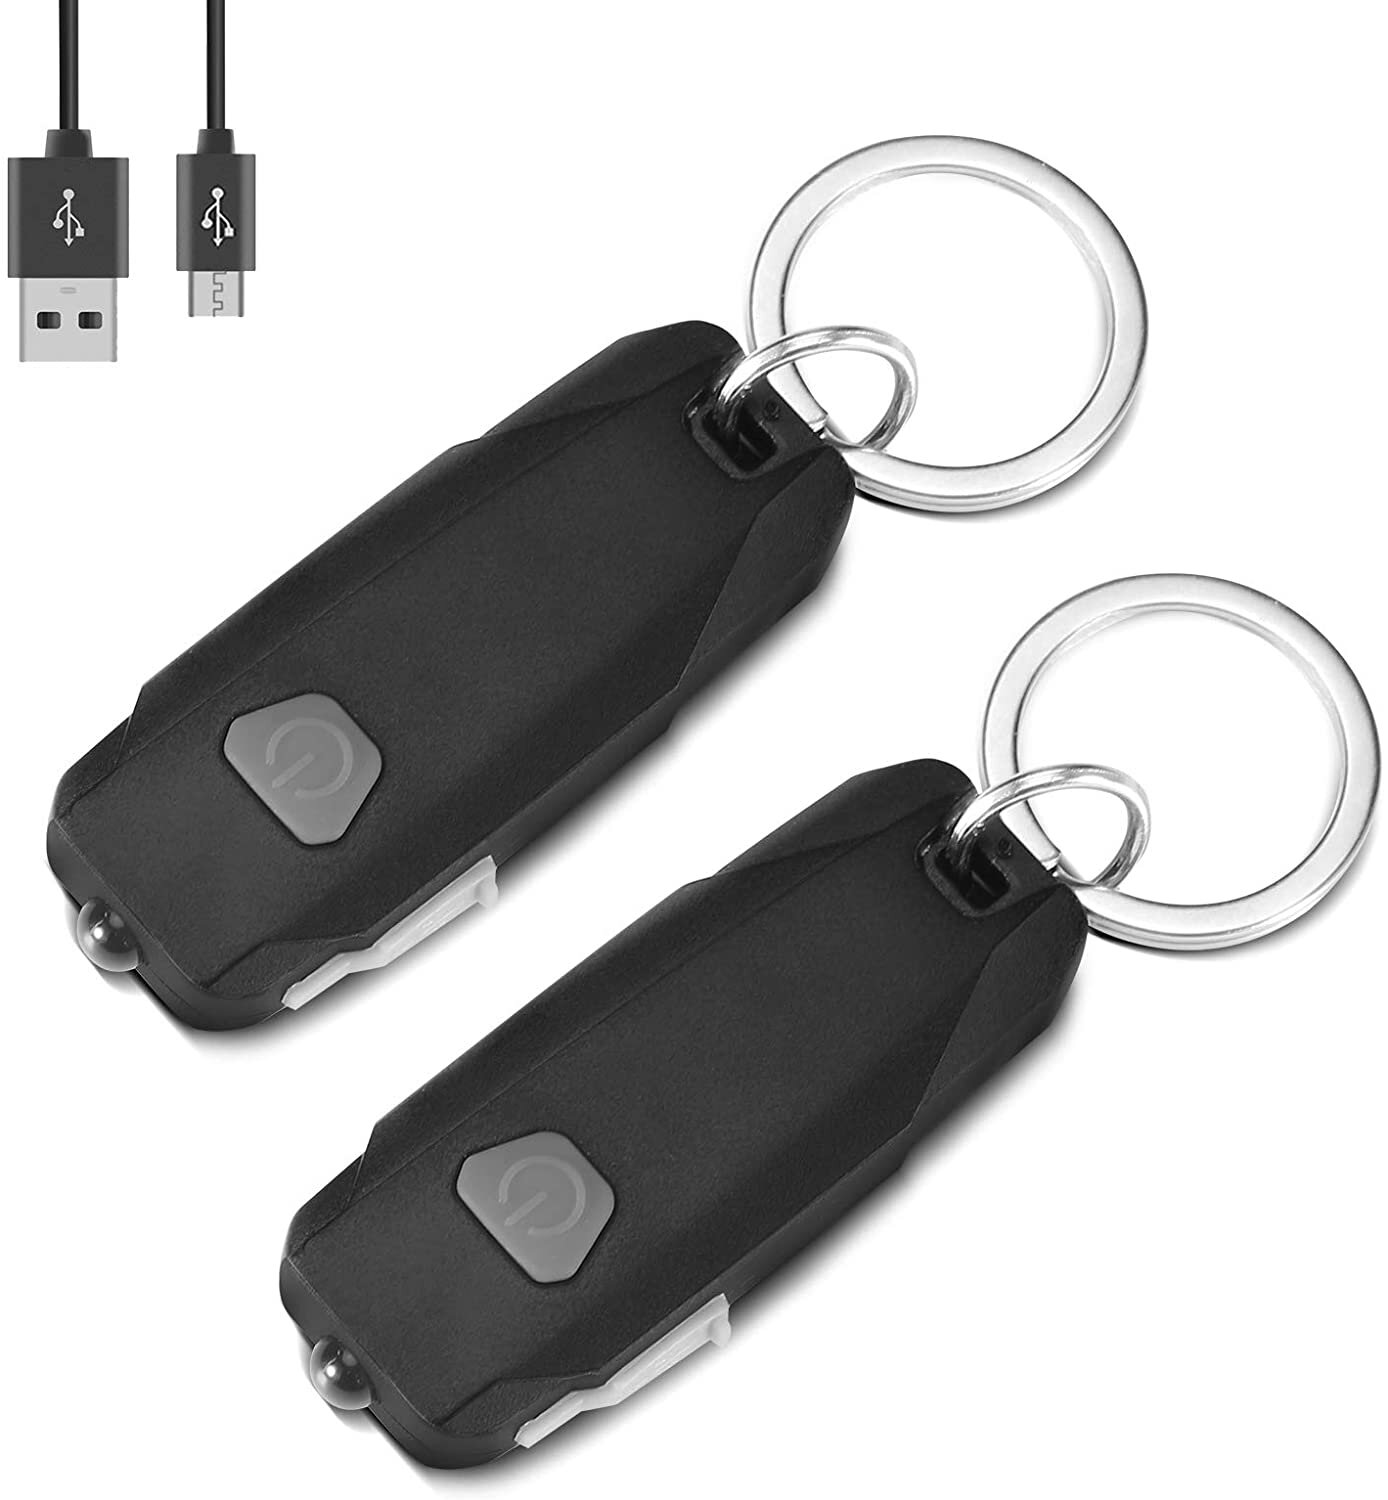 MECO 2 Pack Mini Led Lights, Portable USB Rechargeable Ultra Bright Keychain Flashlight with 2 Level